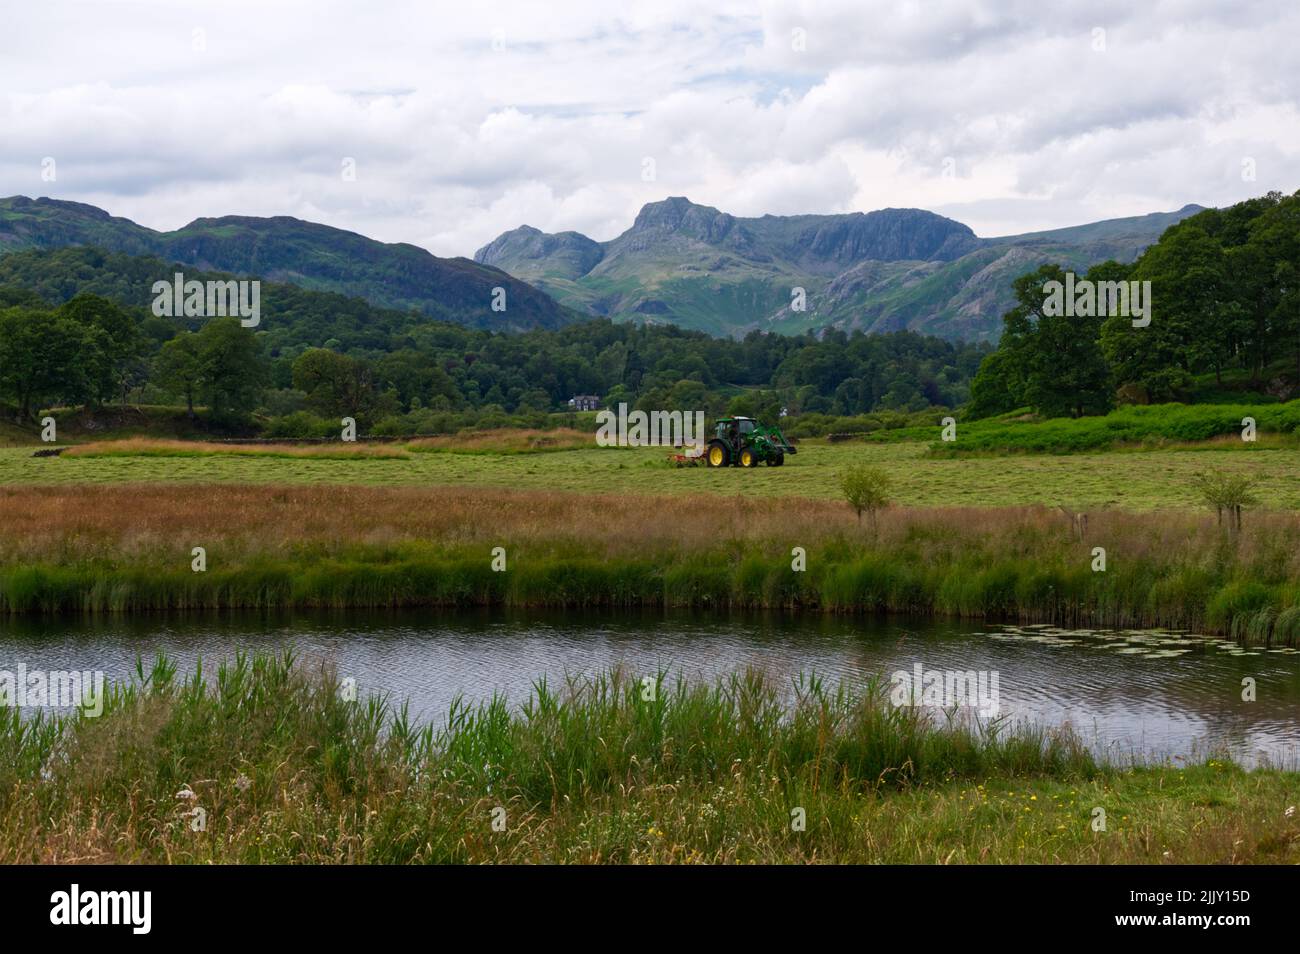 Farmer in Tractor cutting meadows, Elterwater, Langdale, Lake District National Park, England. Stock Photo